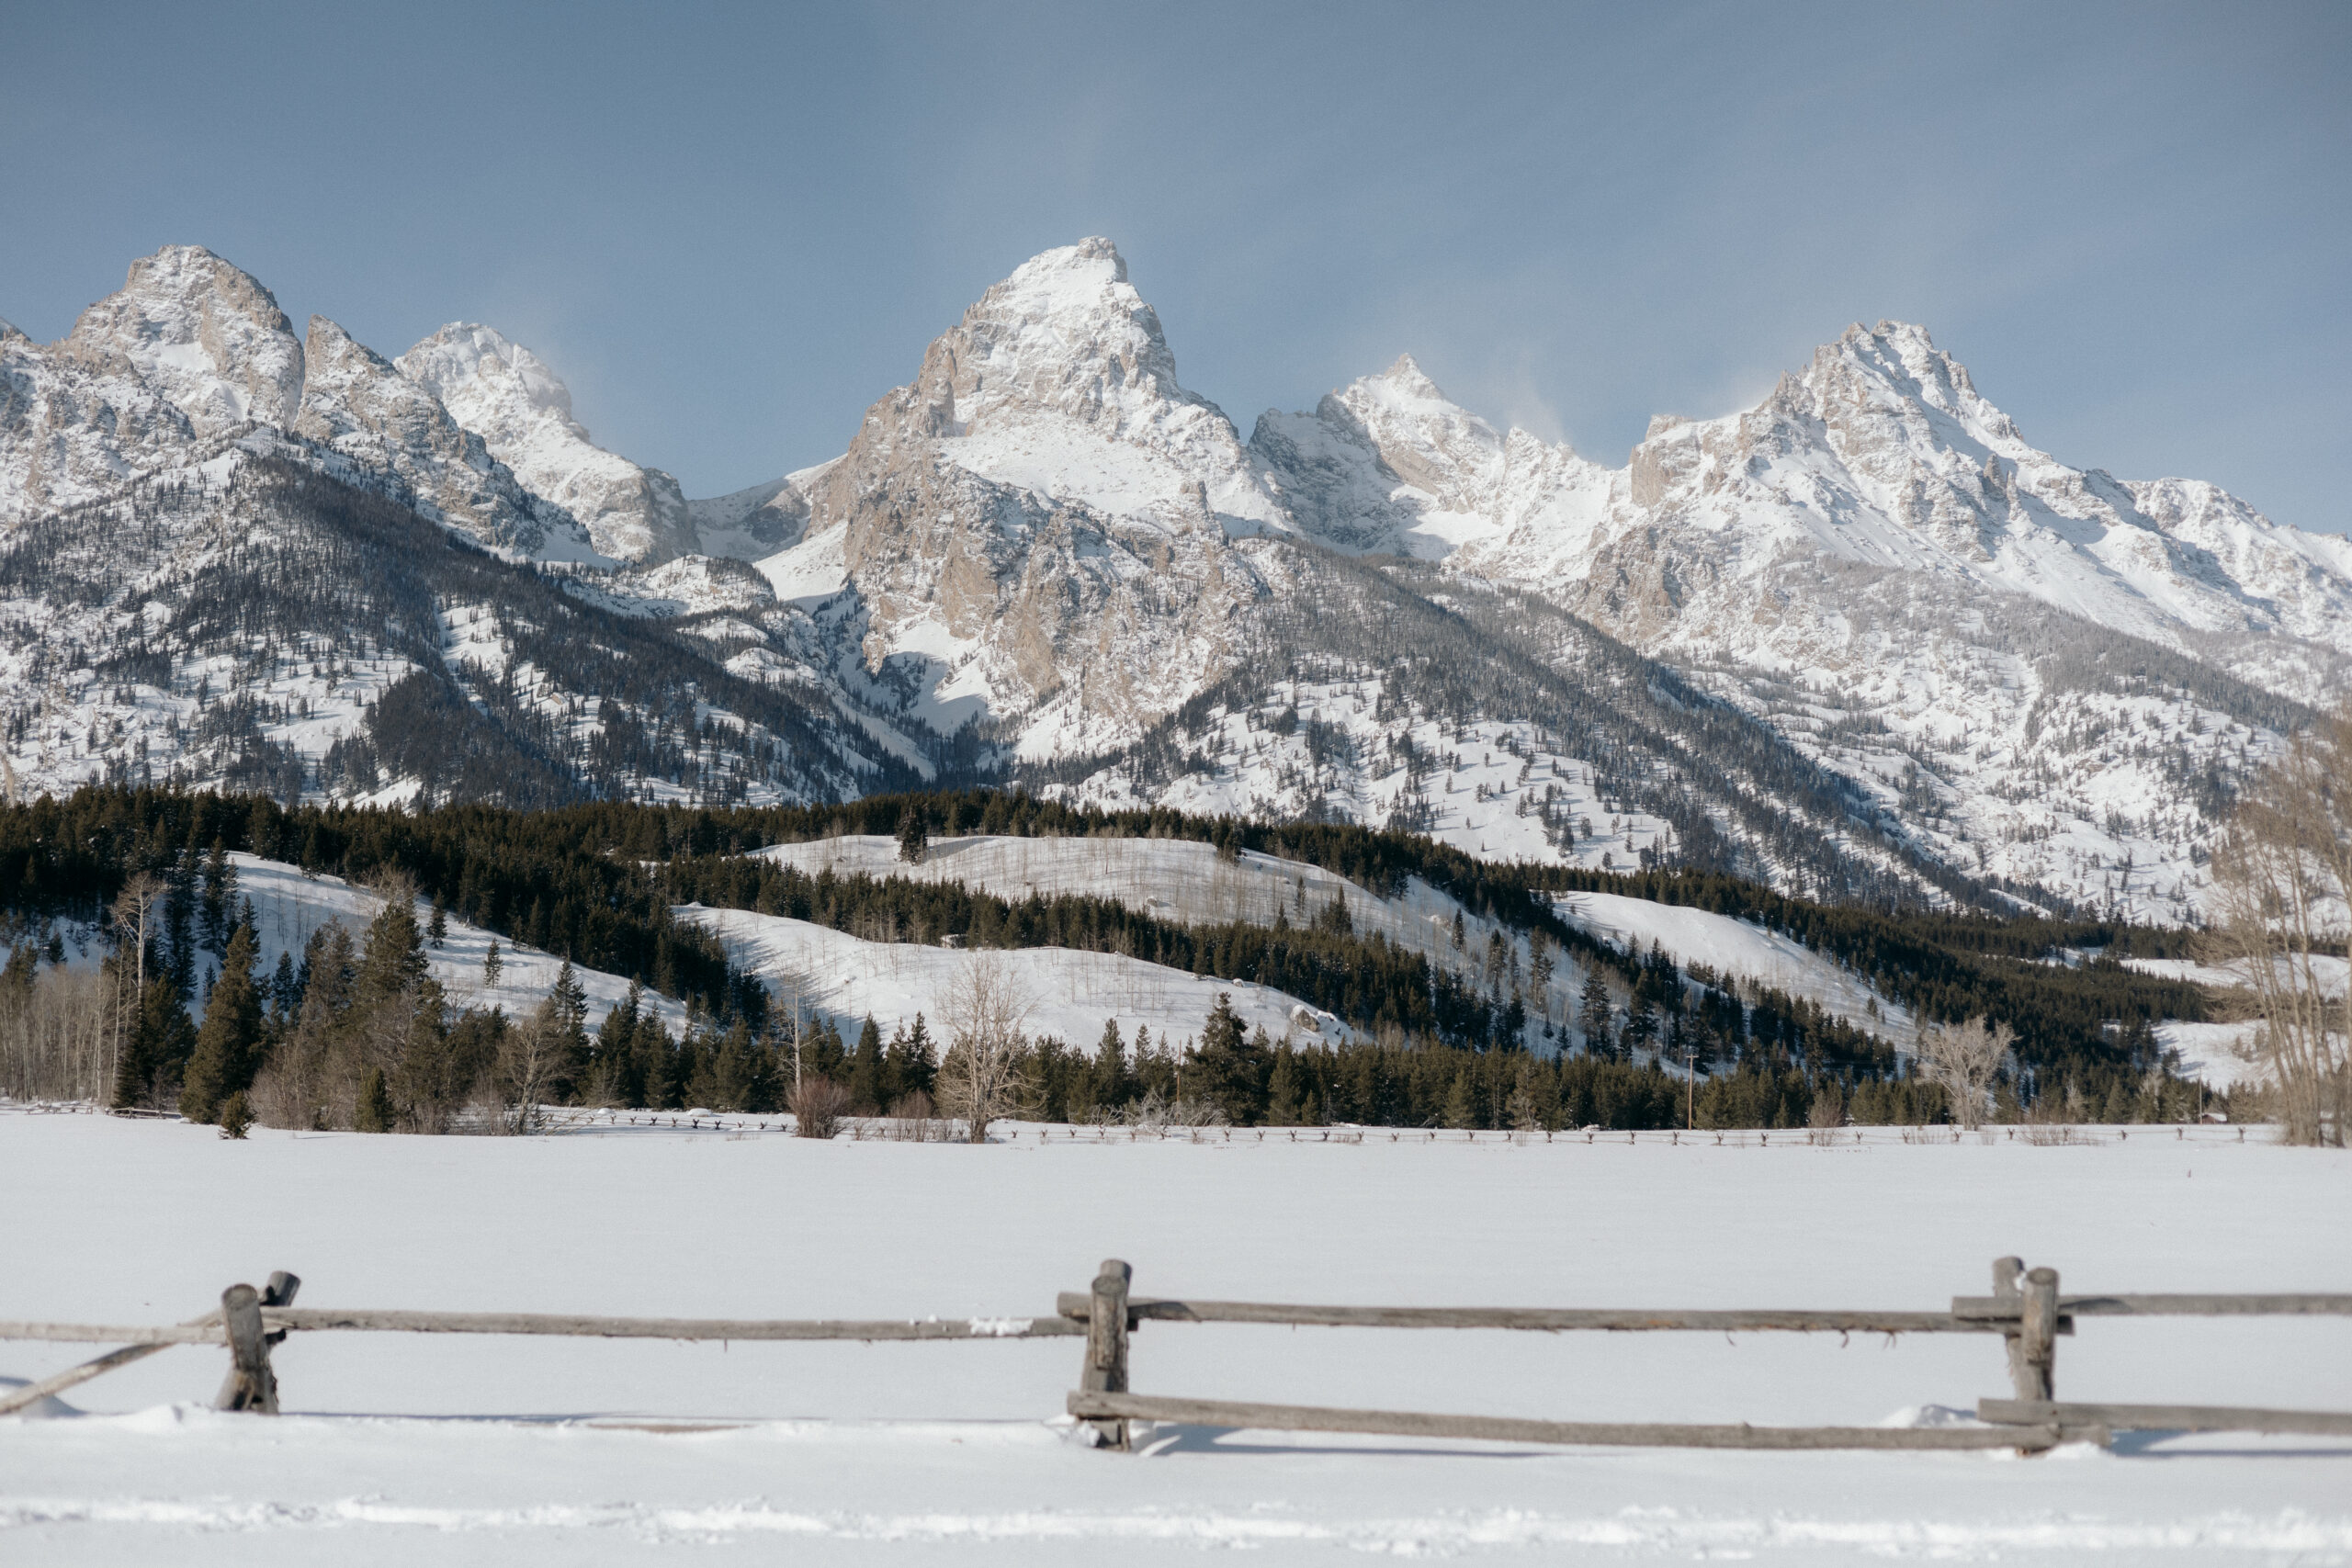 visting grand teton national park in the winter in jackson hole, wyoming